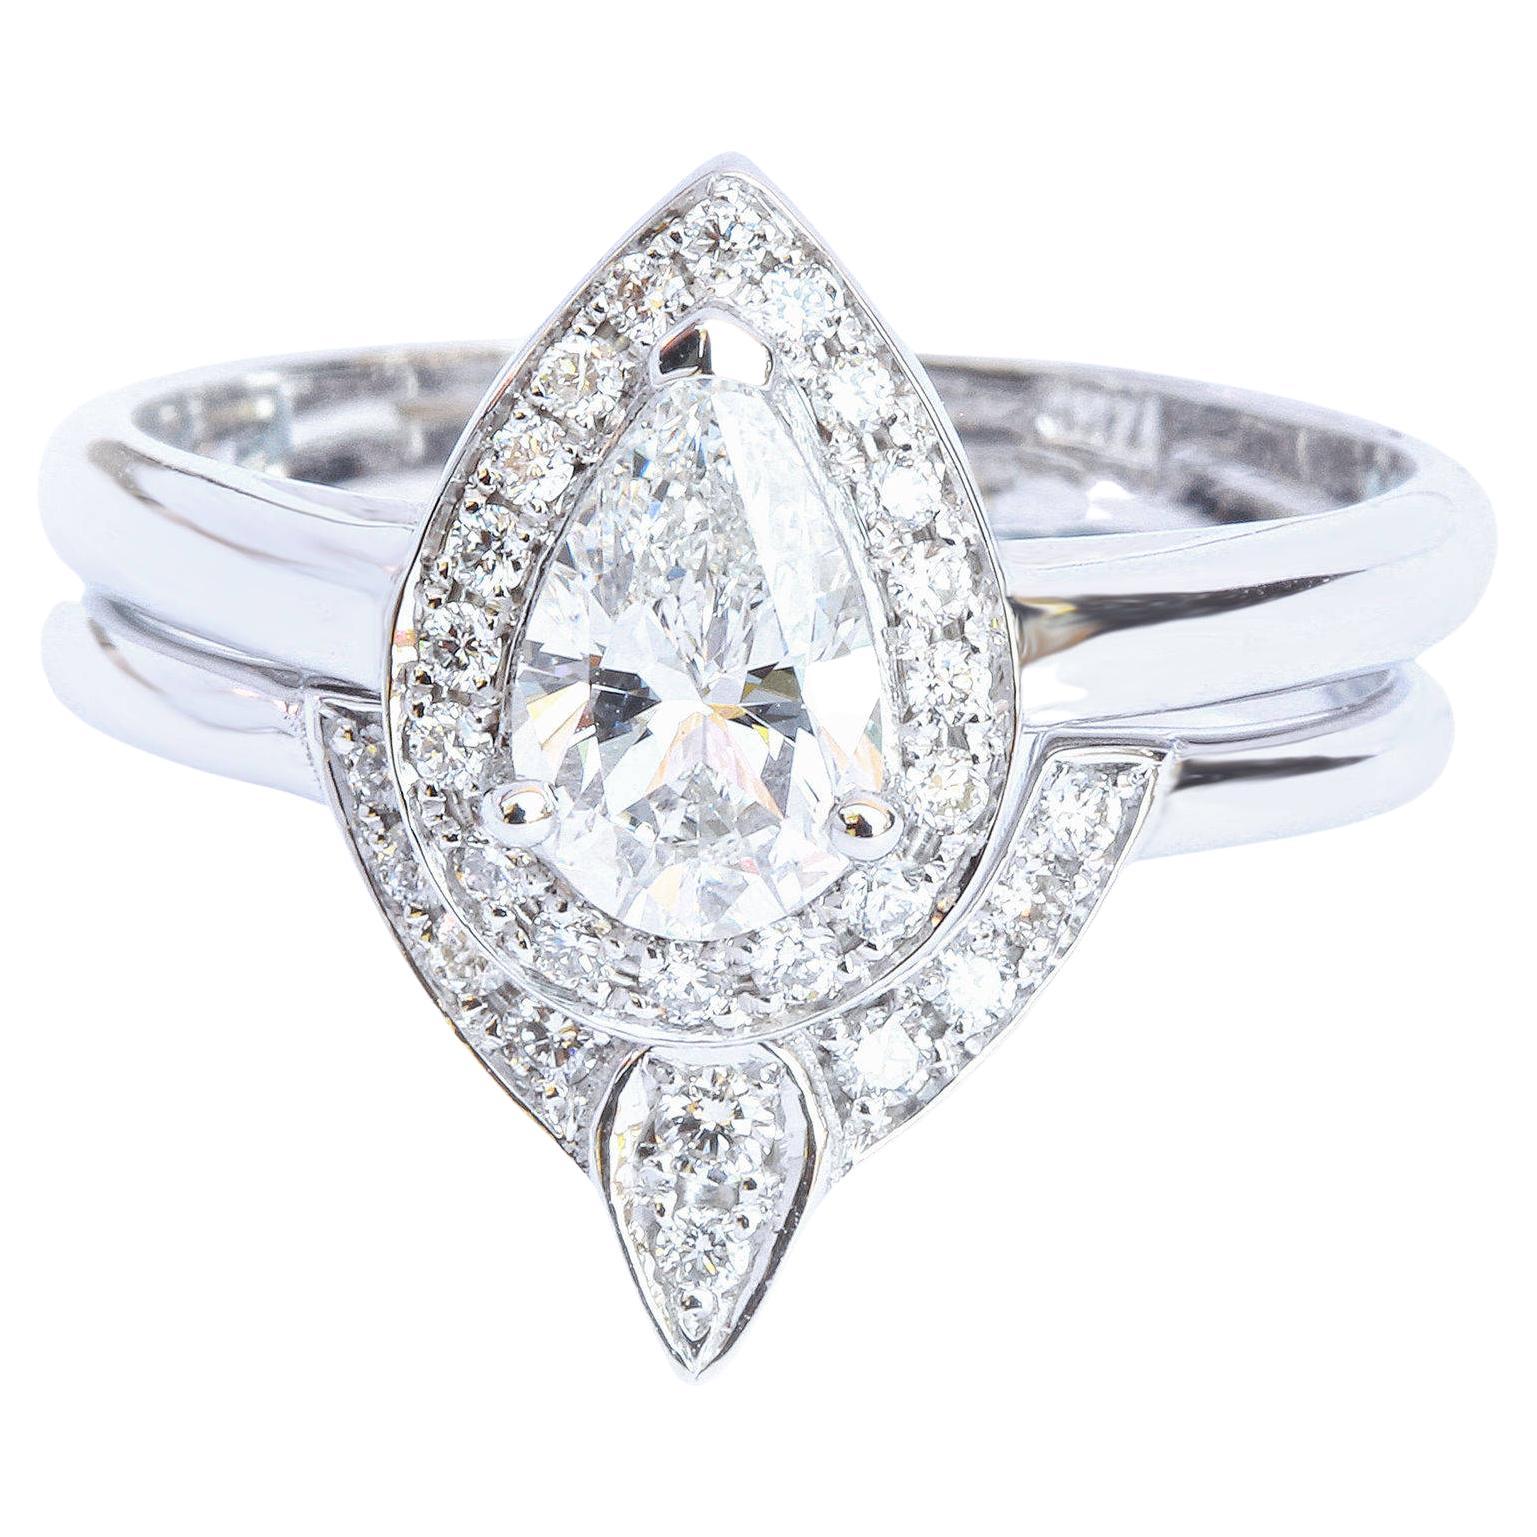 0.60 Carat Pear Diamond Halo Engagement Two Ring Set, Art Deco - The 3rd Eye For Sale